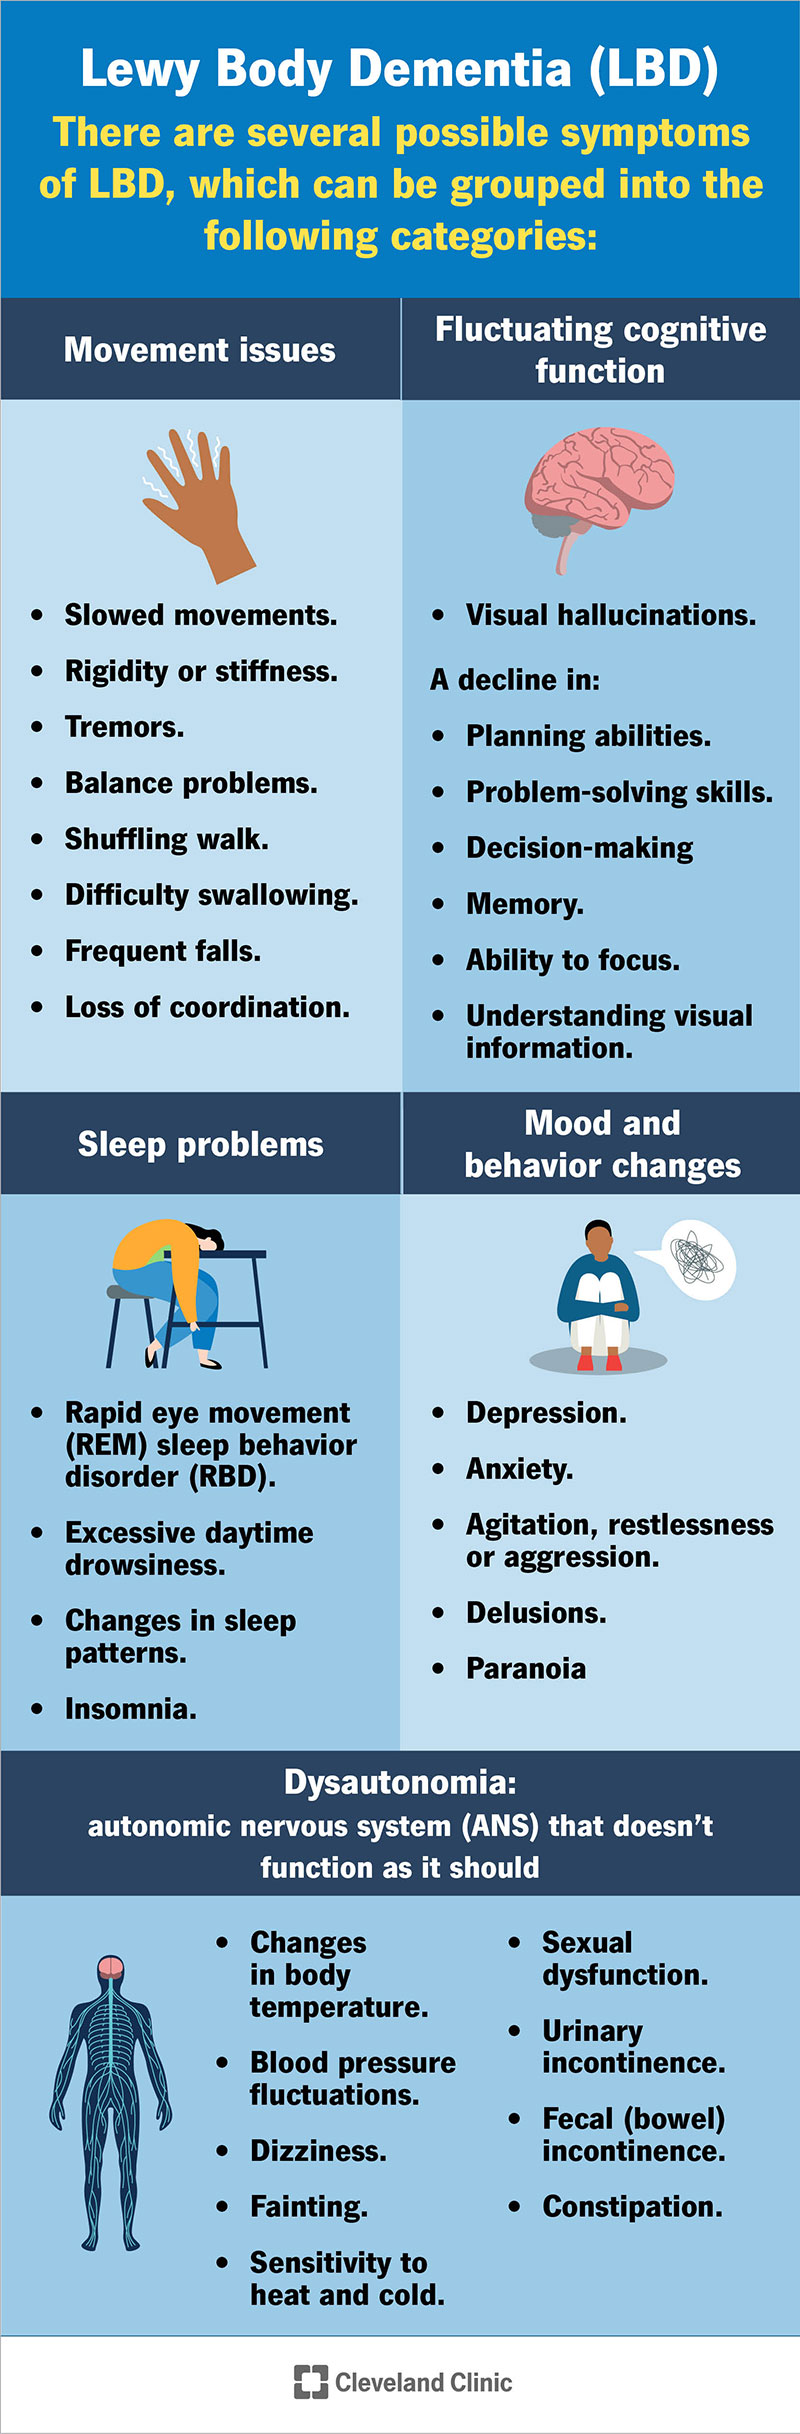 Lewy body dementia symptoms: movement problems, changing cognition, sleep issues, mood swings, and dysautonomia.